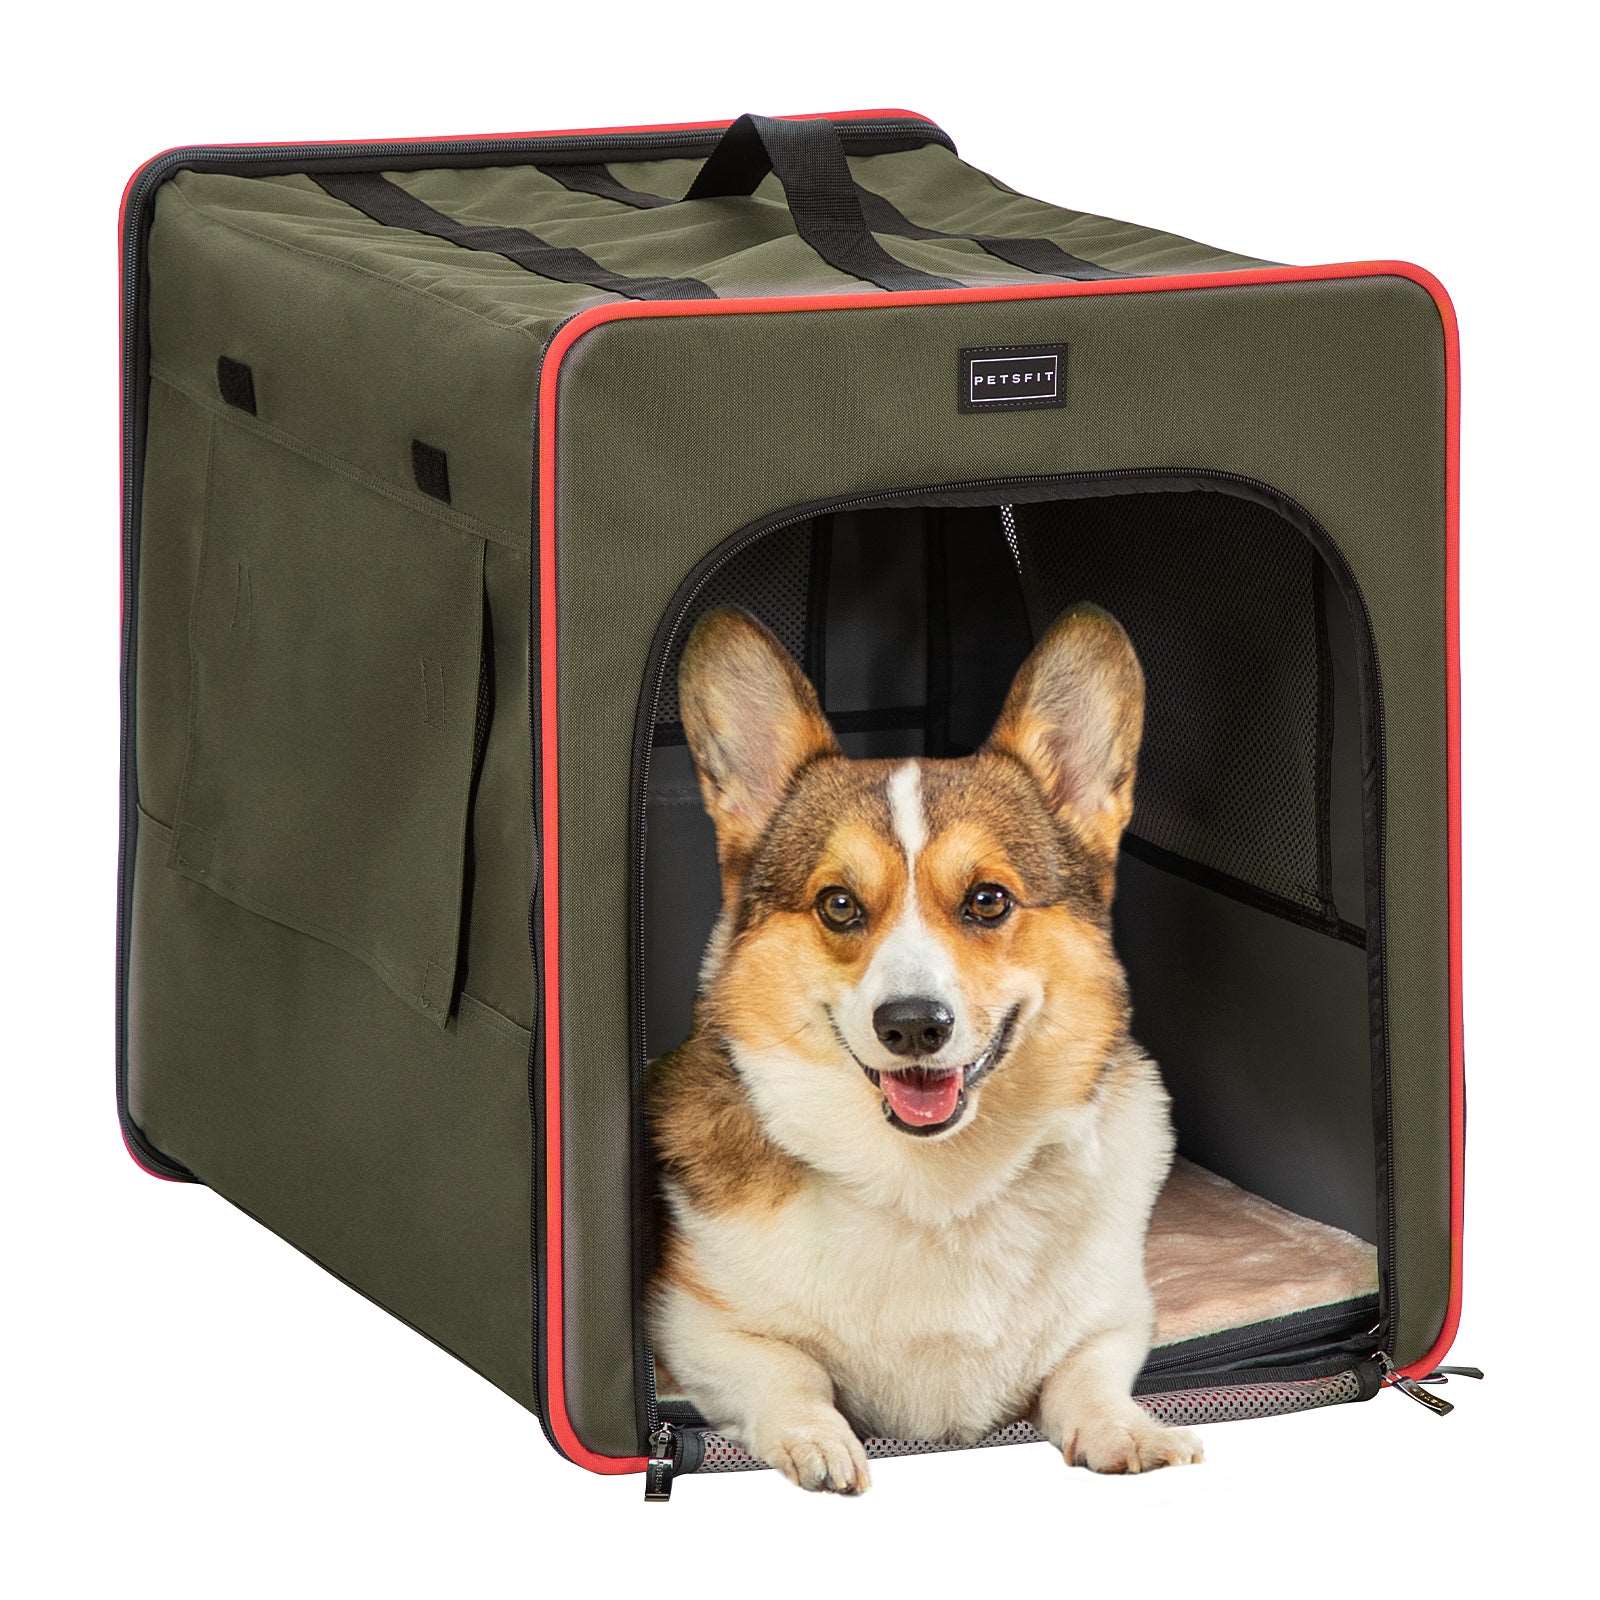 Petsfit-Sturdy-Wire-Frame-Soft-Pet-Crate-Collapsible-for-Travel-02